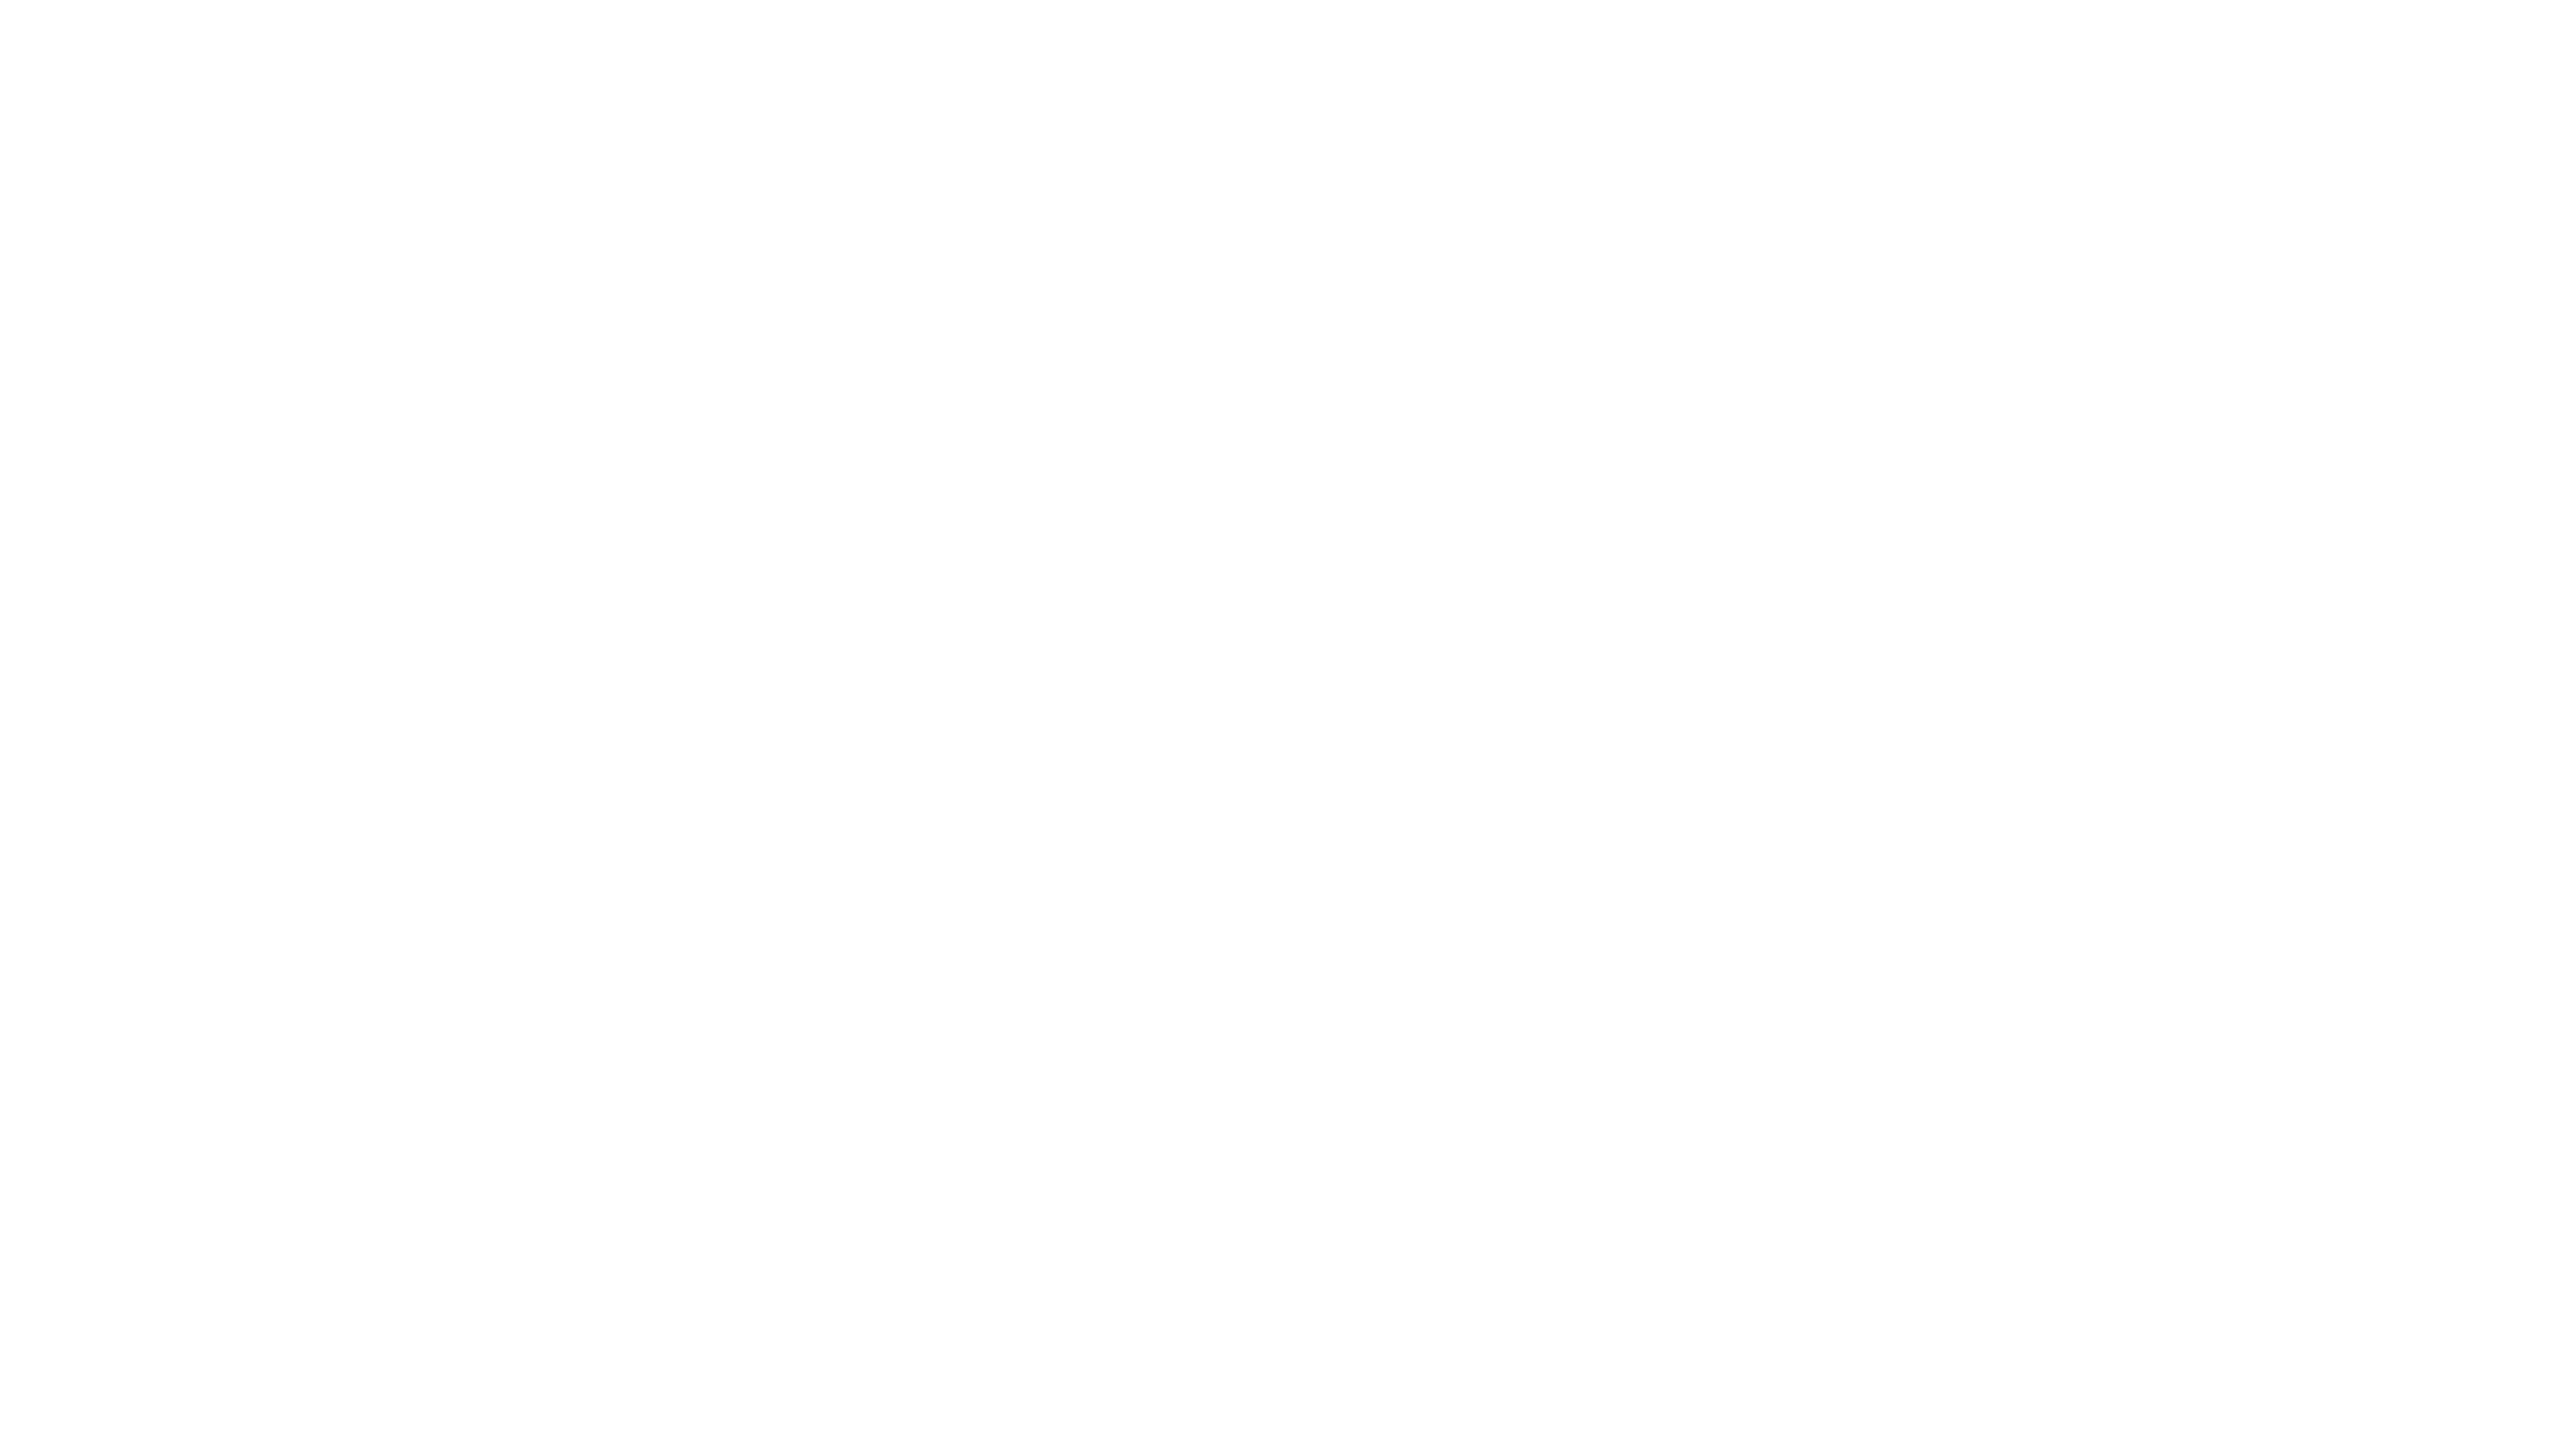 Signs of Hope